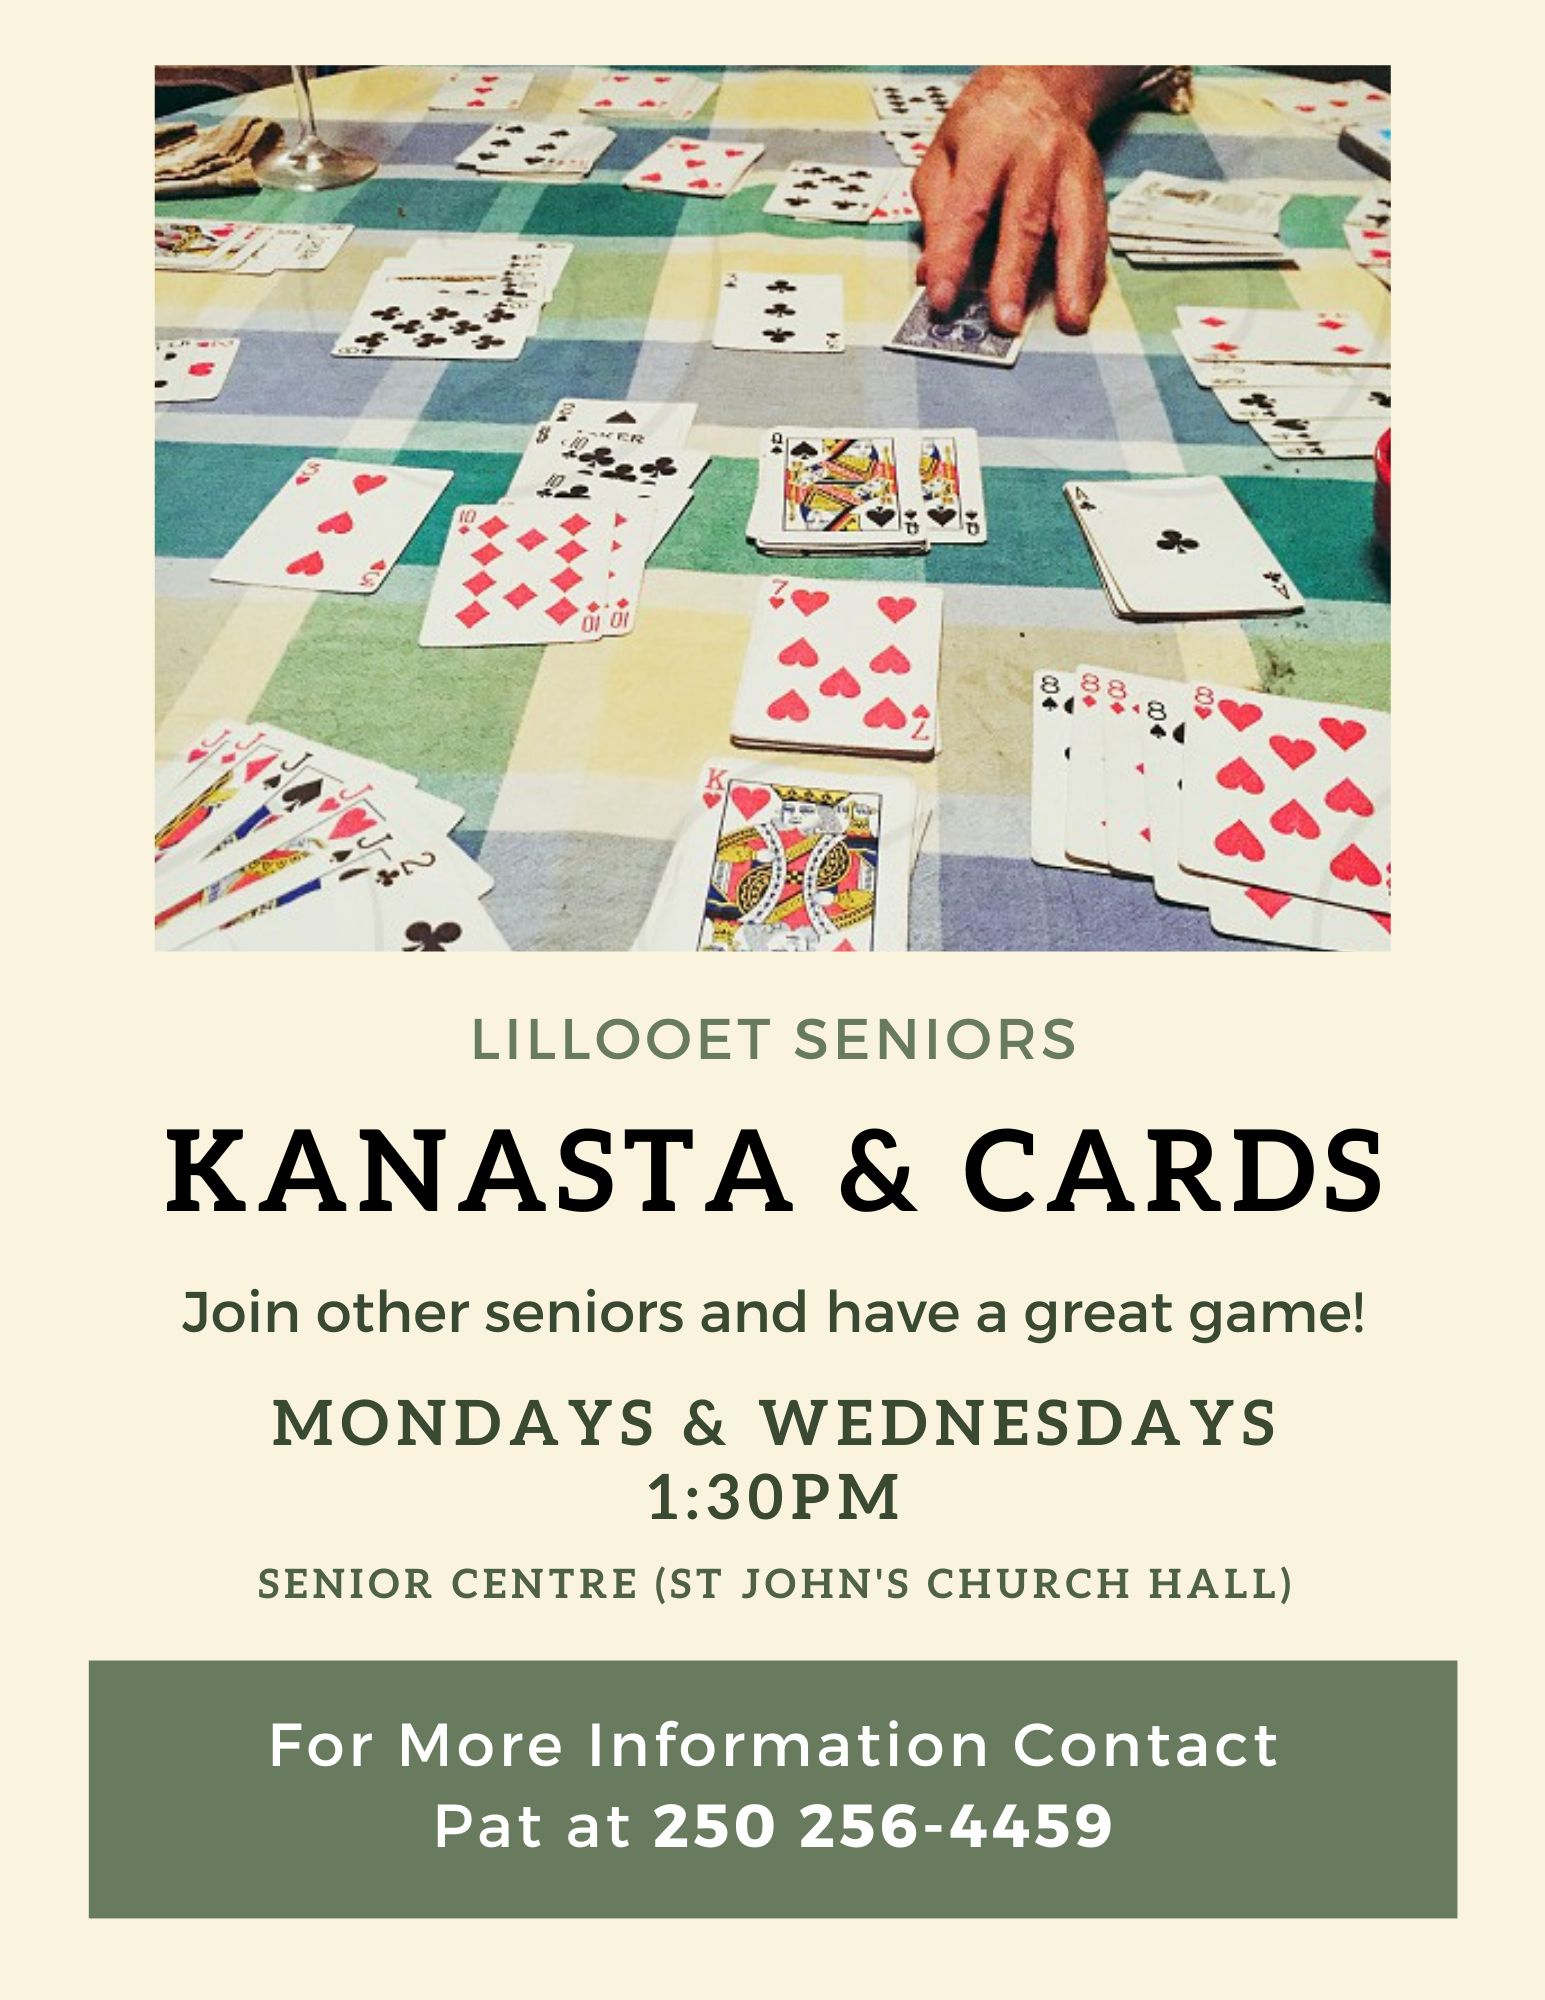 Poster for kanasta and cards for seniors every Monday and Wednesday